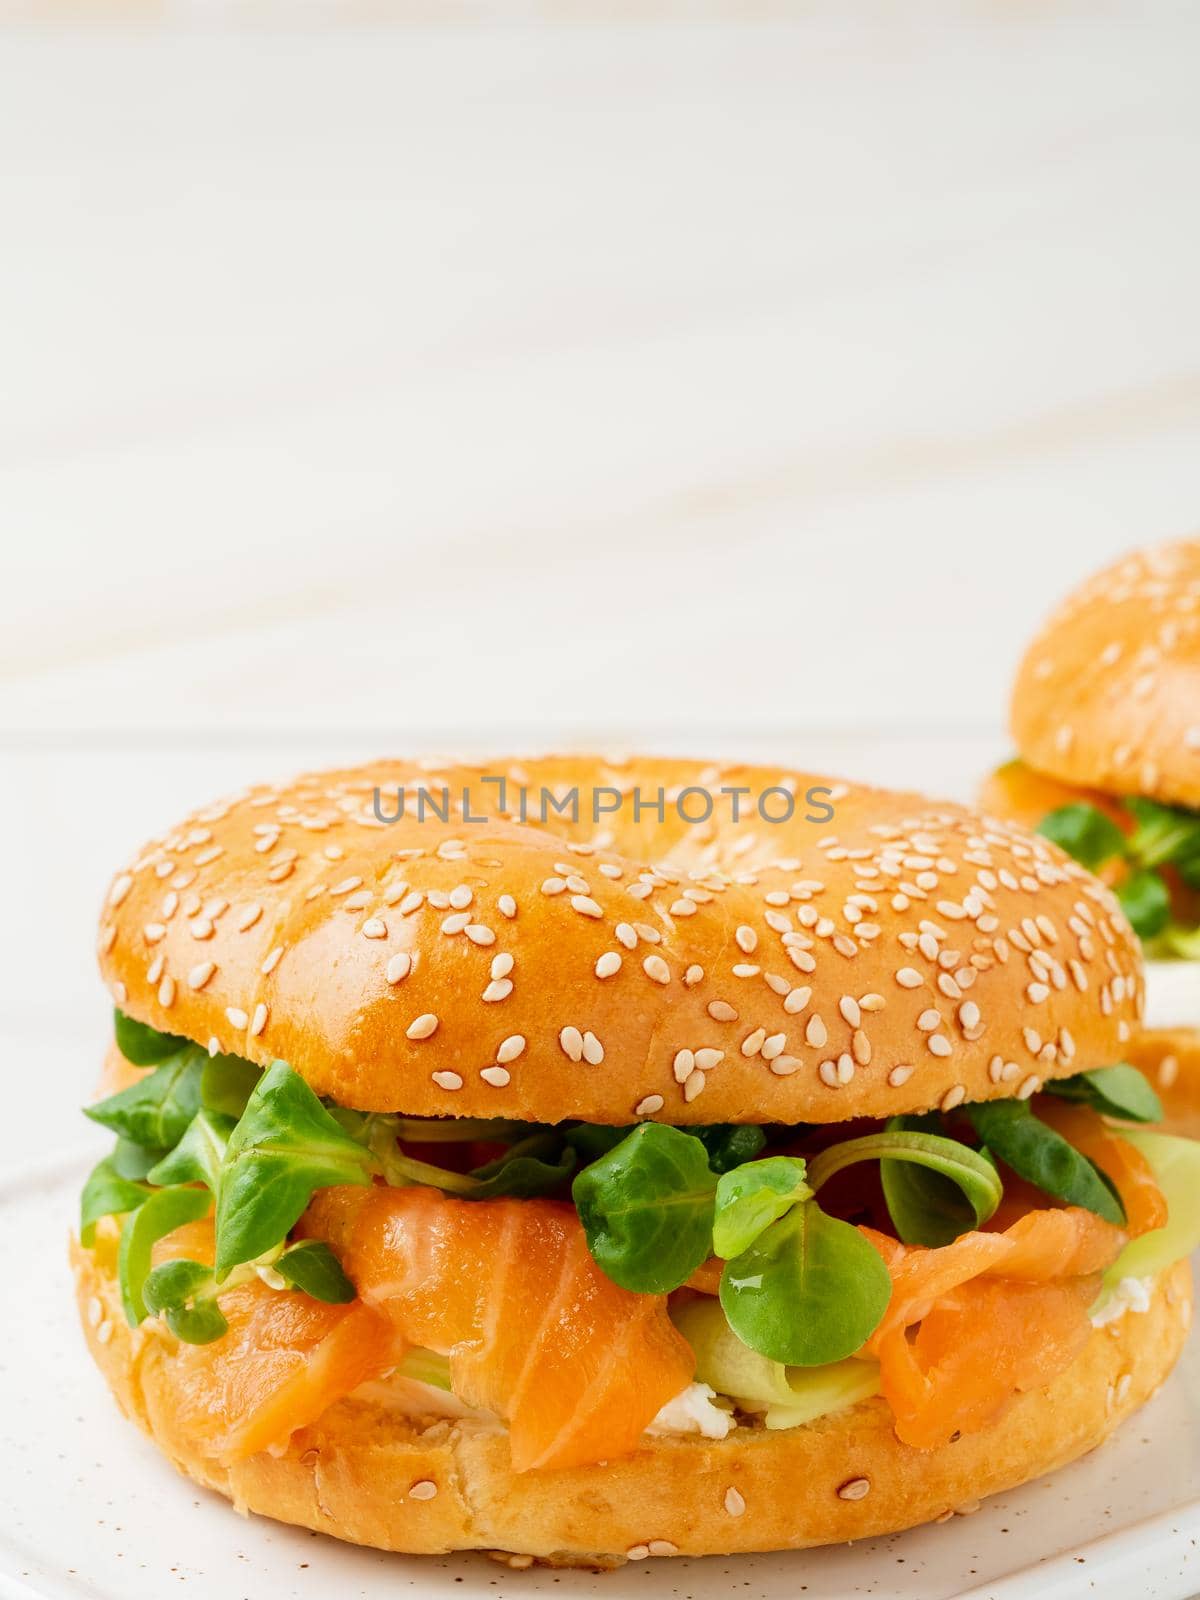 Two sandwiches with salmon, cream cheese, cucumber slices on white marble table, vertical, copy space